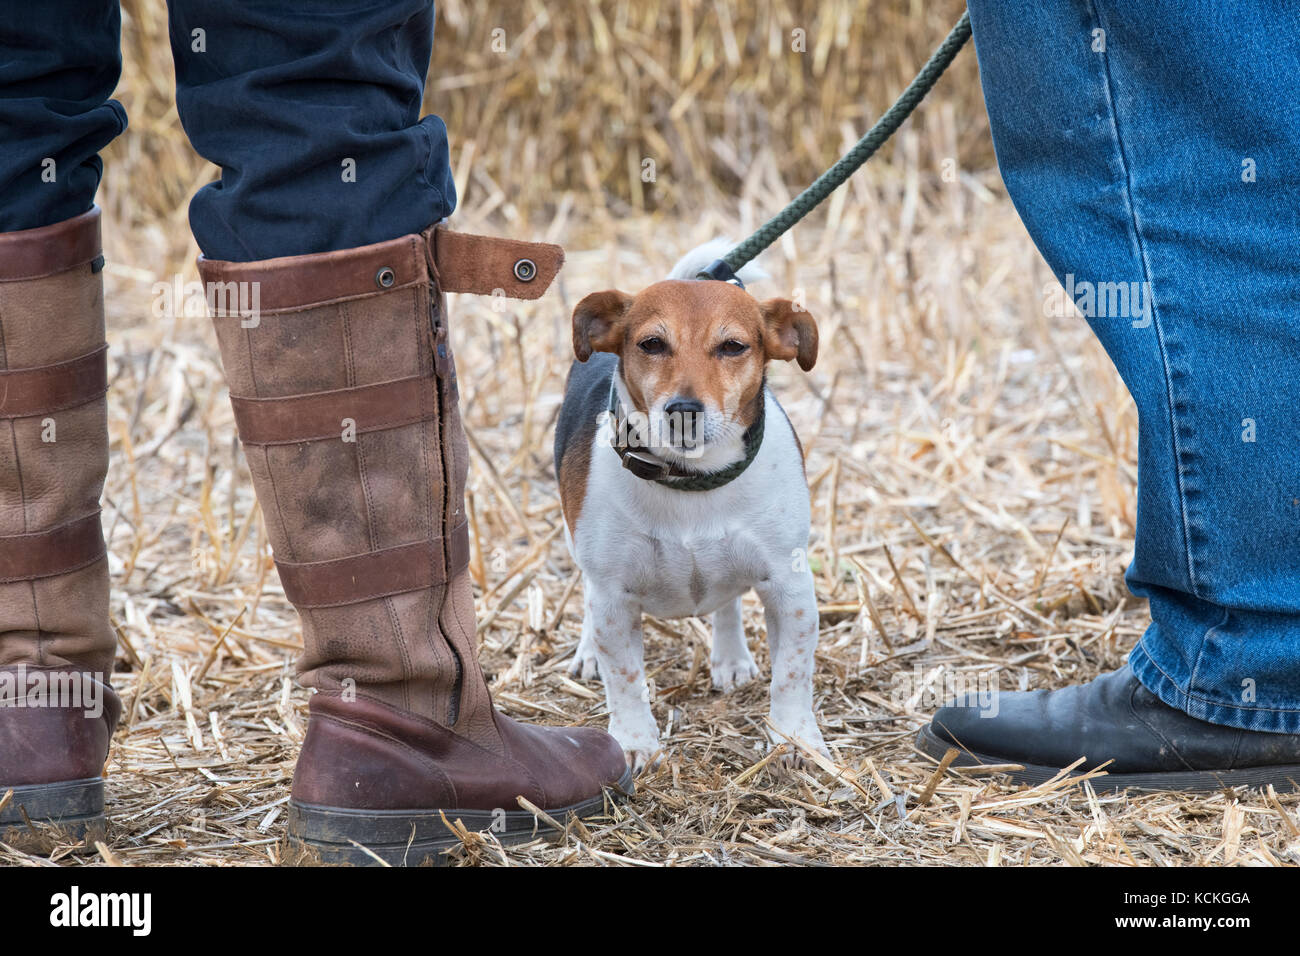 Jack russell terrier dog at the Fairford, Faringdon, Filkins and Burford Ploughing Society Show. Lechlade on Thames, Gloucestershire, UK Stock Photo